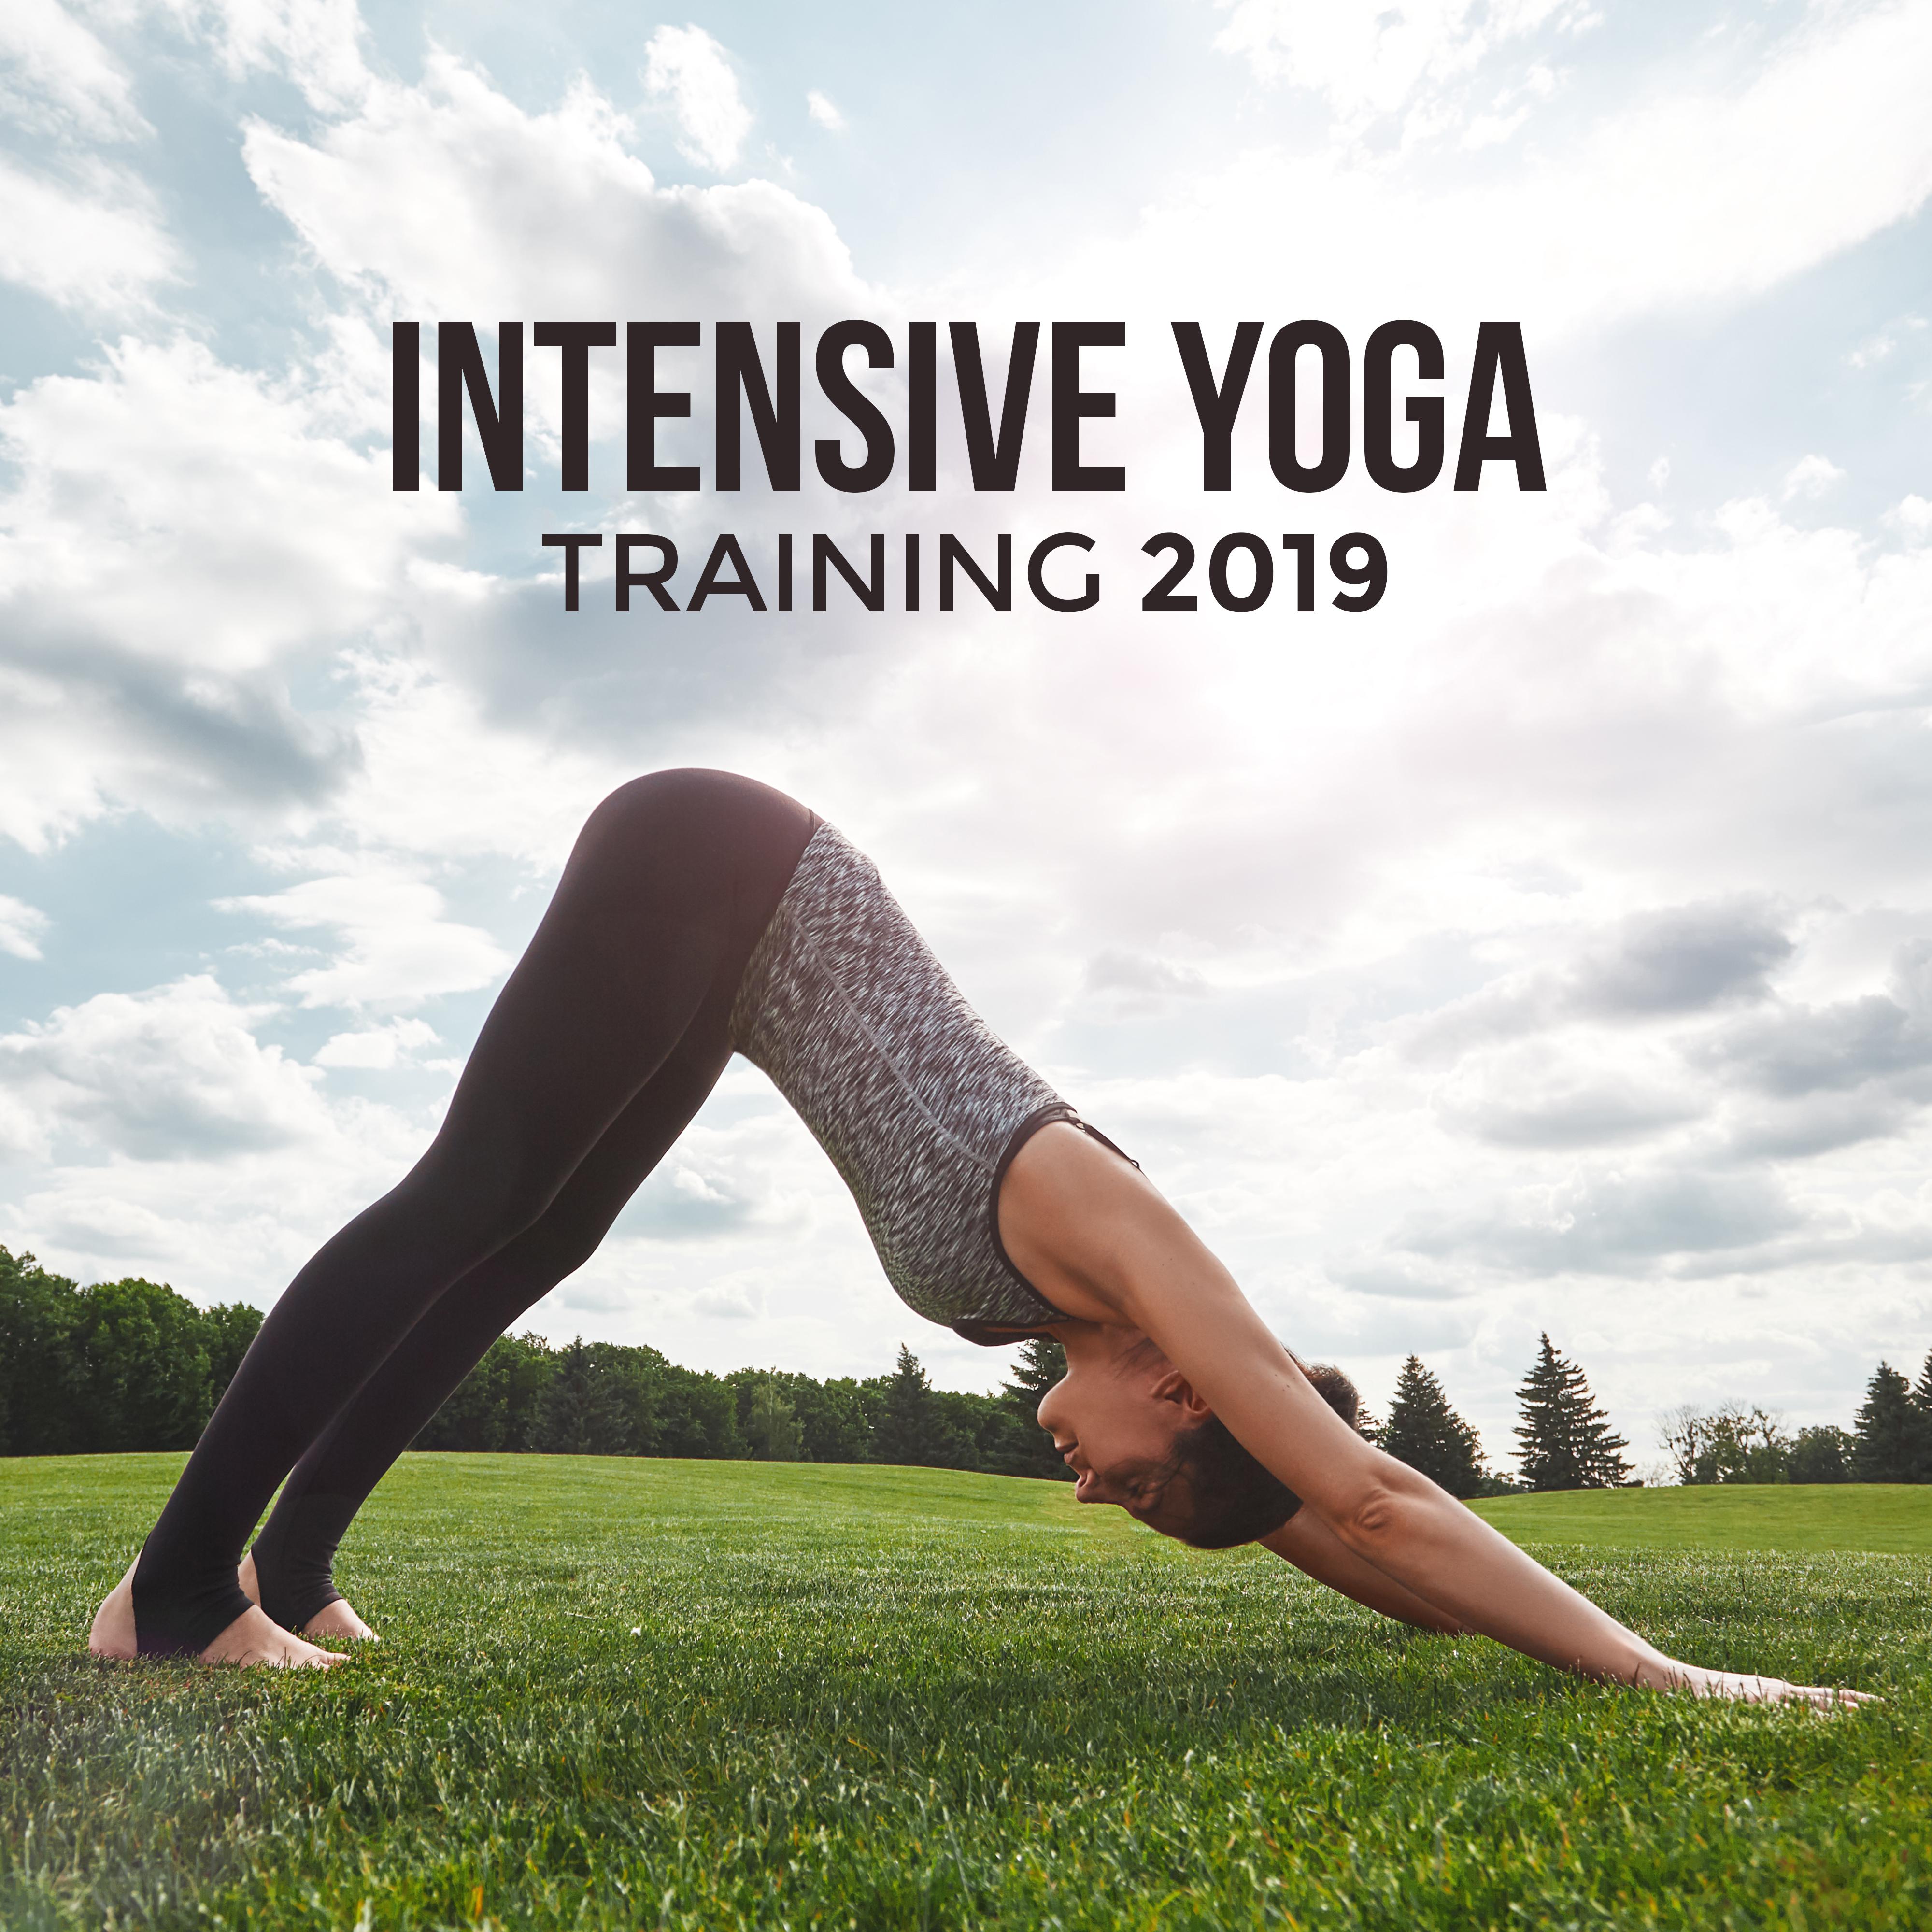 Intensive Yoga Training 2019: 15 New Age Deep Songs for Total Relaxation & Perfect Meditation Experience